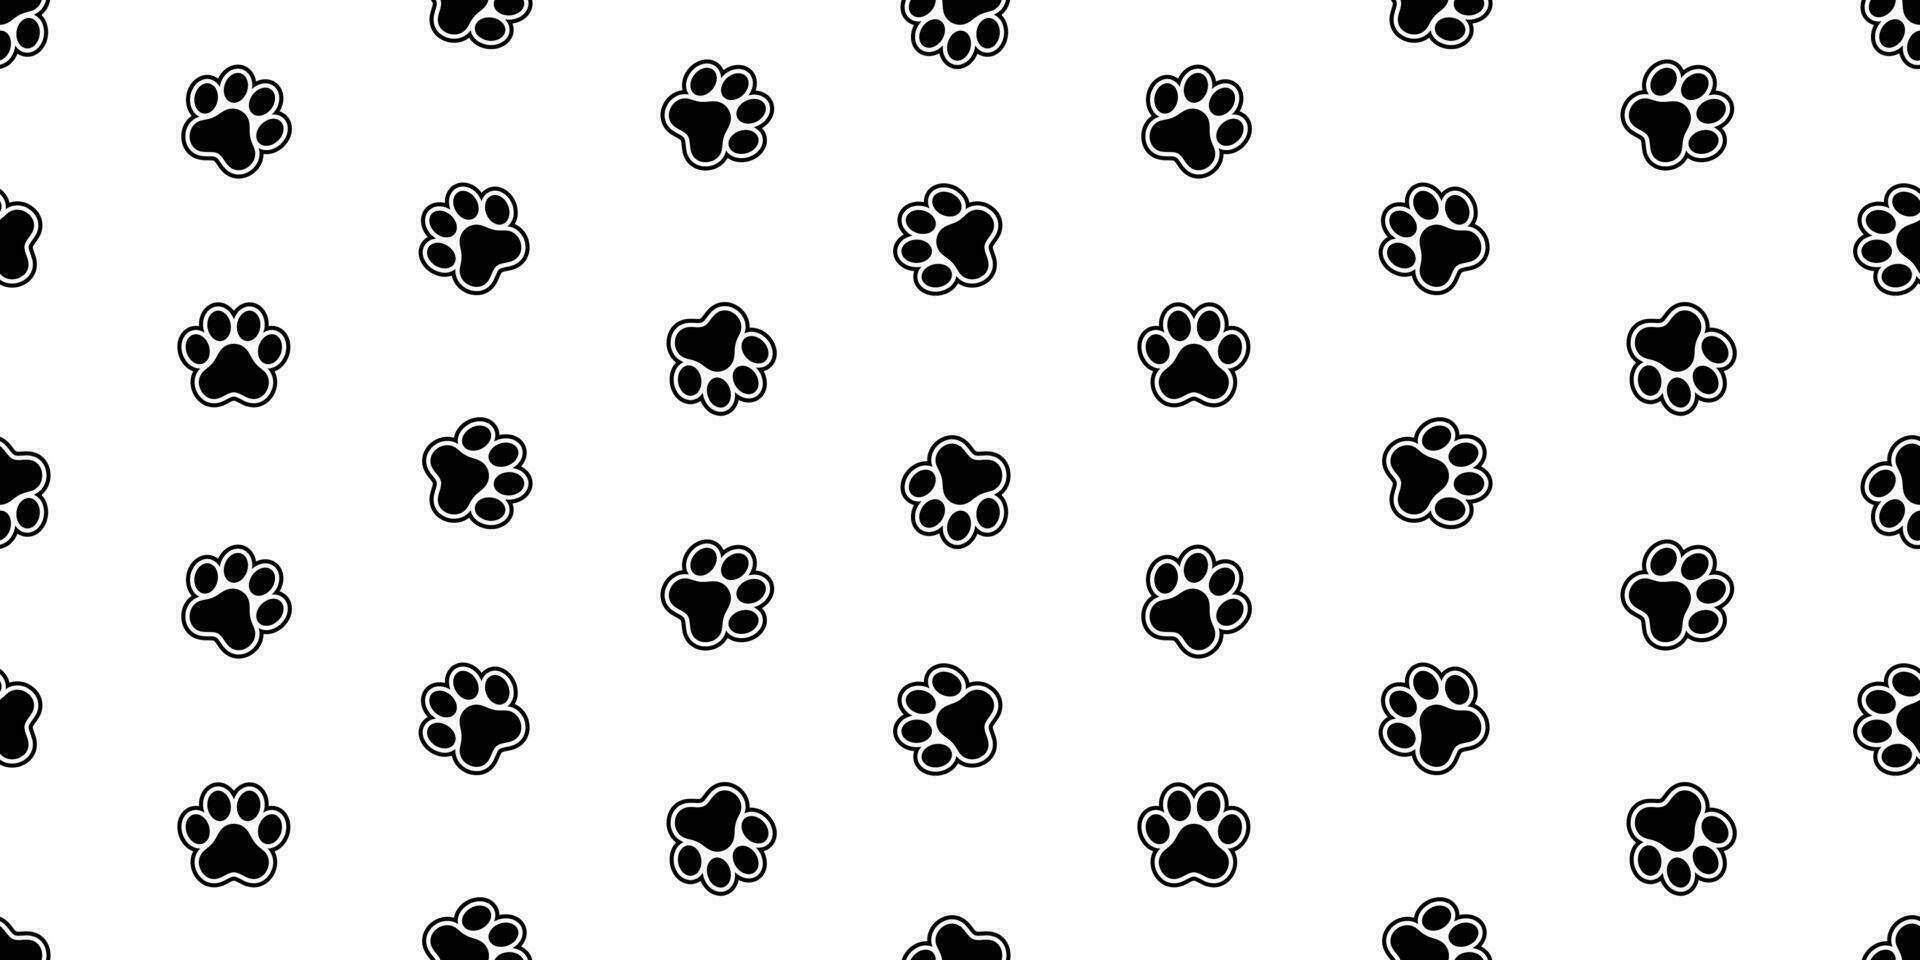 dog paw seamless pattern vector footprint french bulldog cartoon scarf isolated repeat wallpaper tile background doodle illustration design